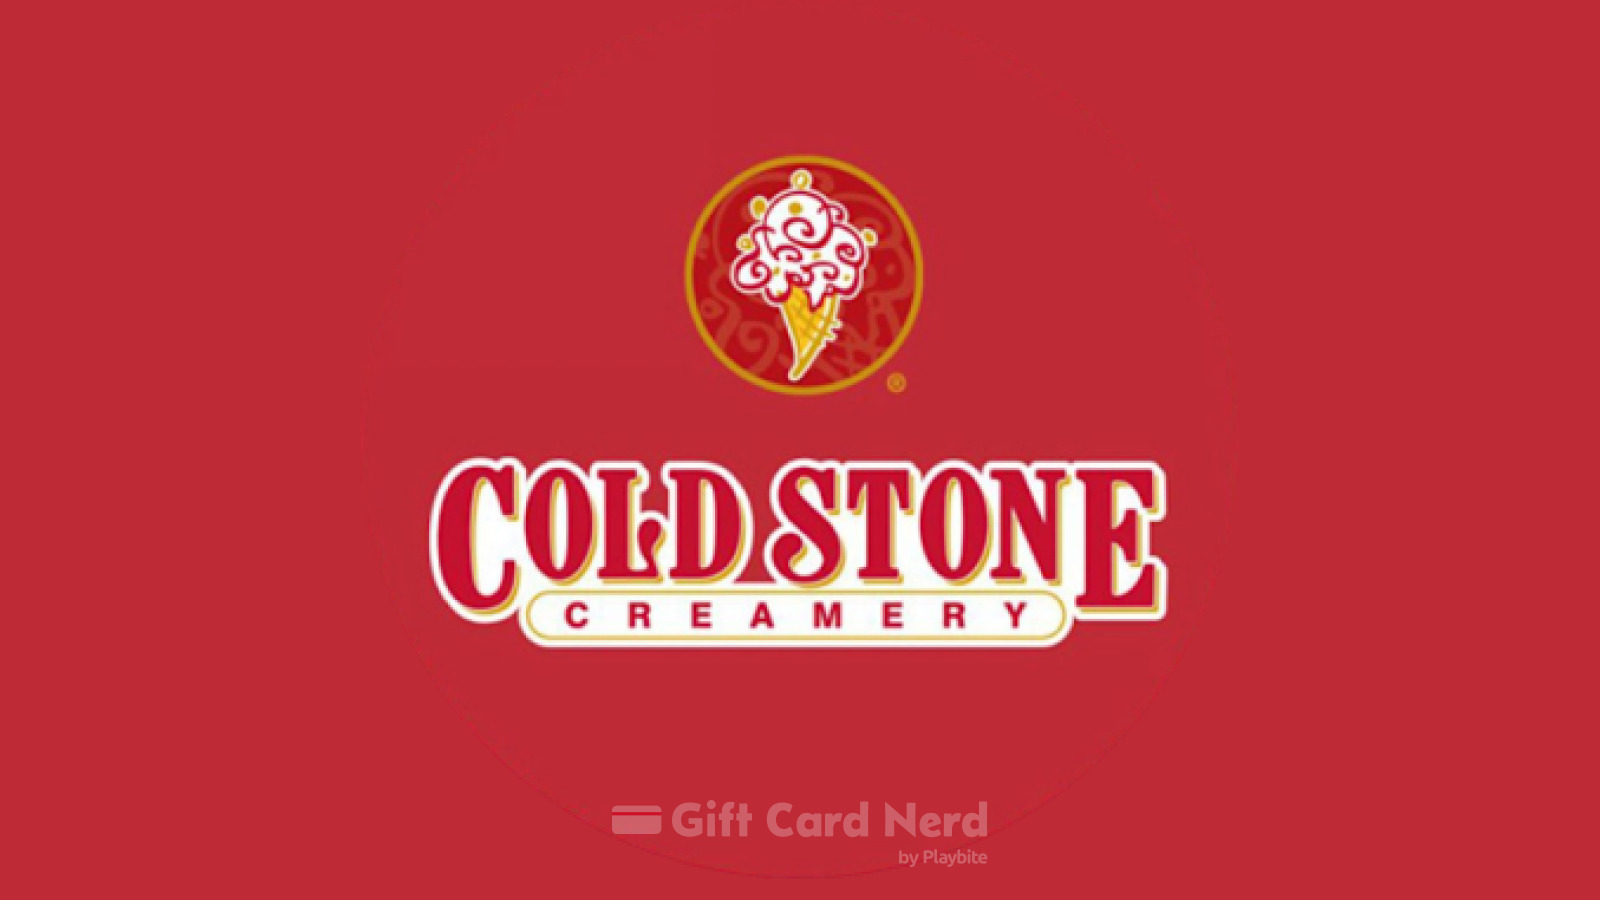 Can I Use a Cold Stone Creamery Gift Card on Postmates?